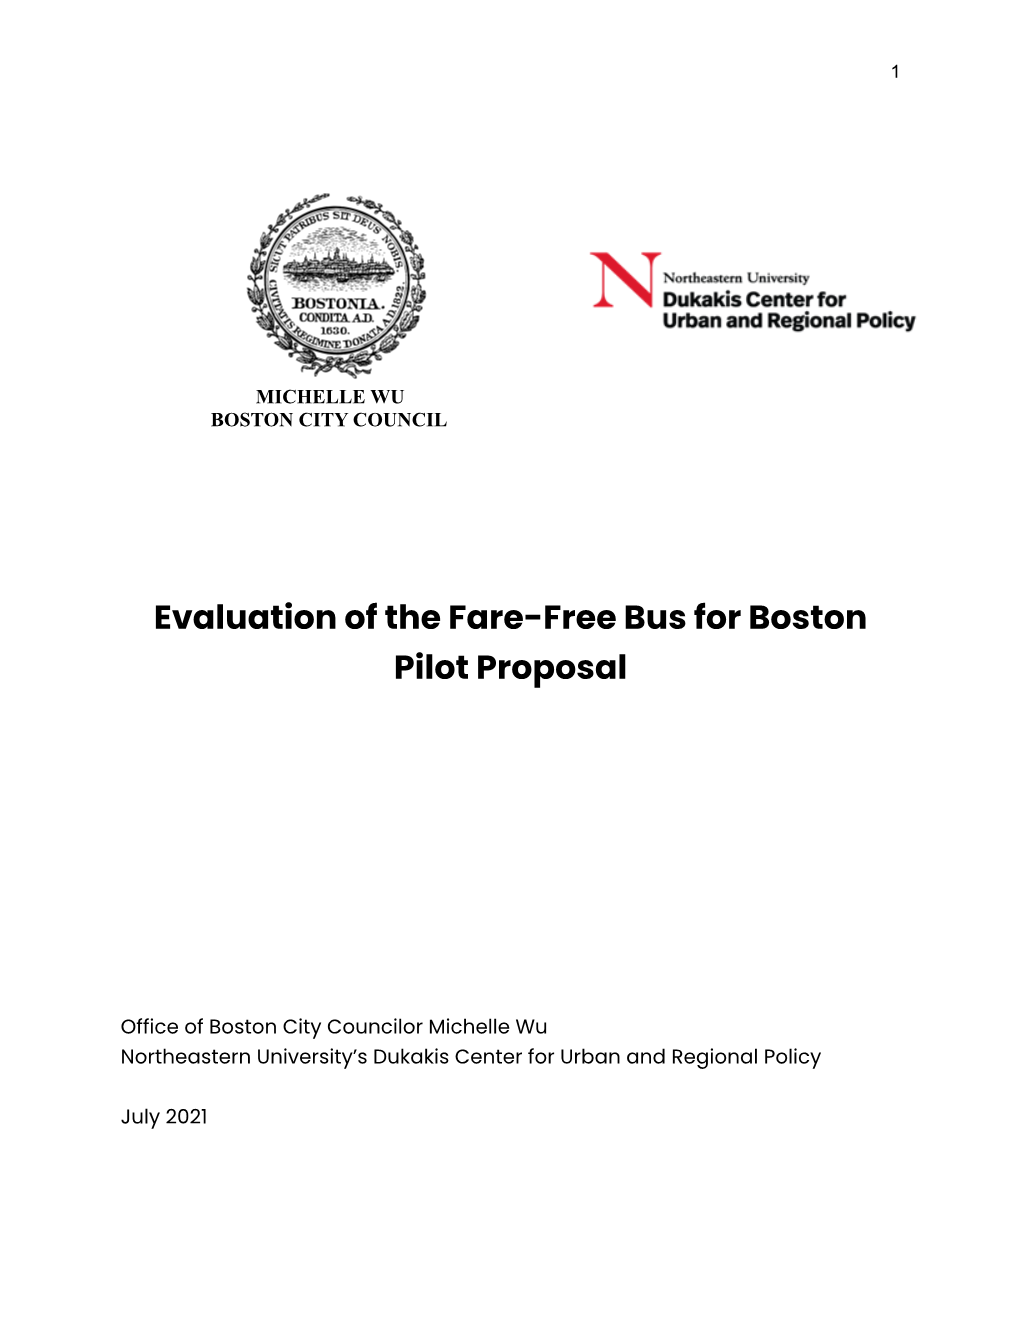 Evaluation of the Fare-Free Bus for Boston Pilot Proposal